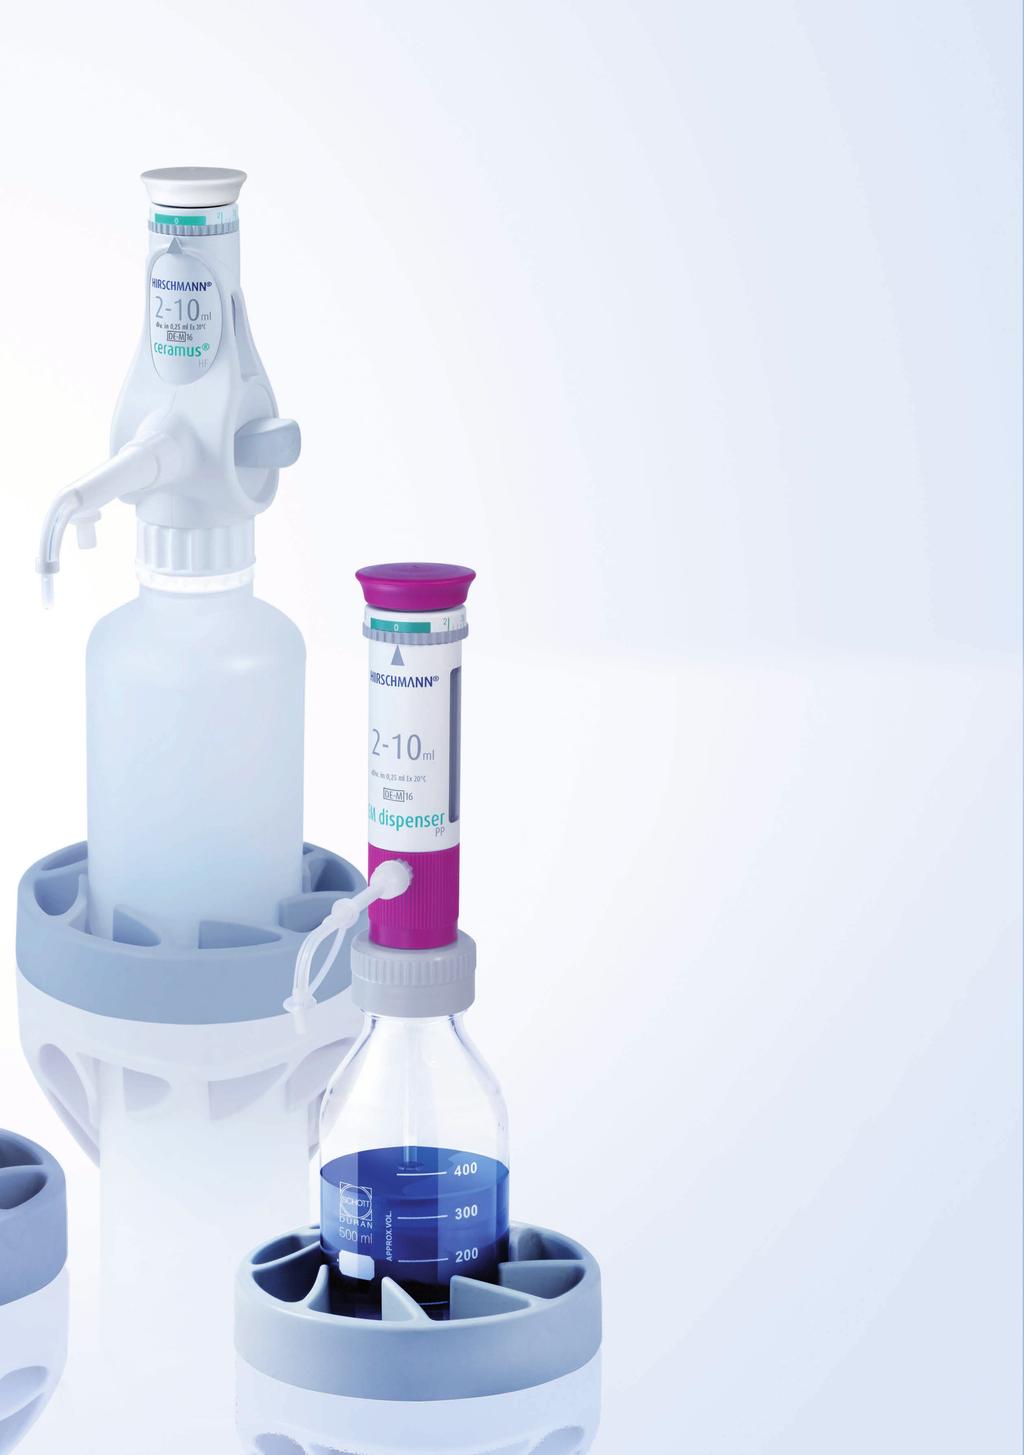 ceramus HF Specially developed for hydrofluoric acid or other aggressive media A special version designed for dispensing very aggressive media, the ceramus HF, is also available.